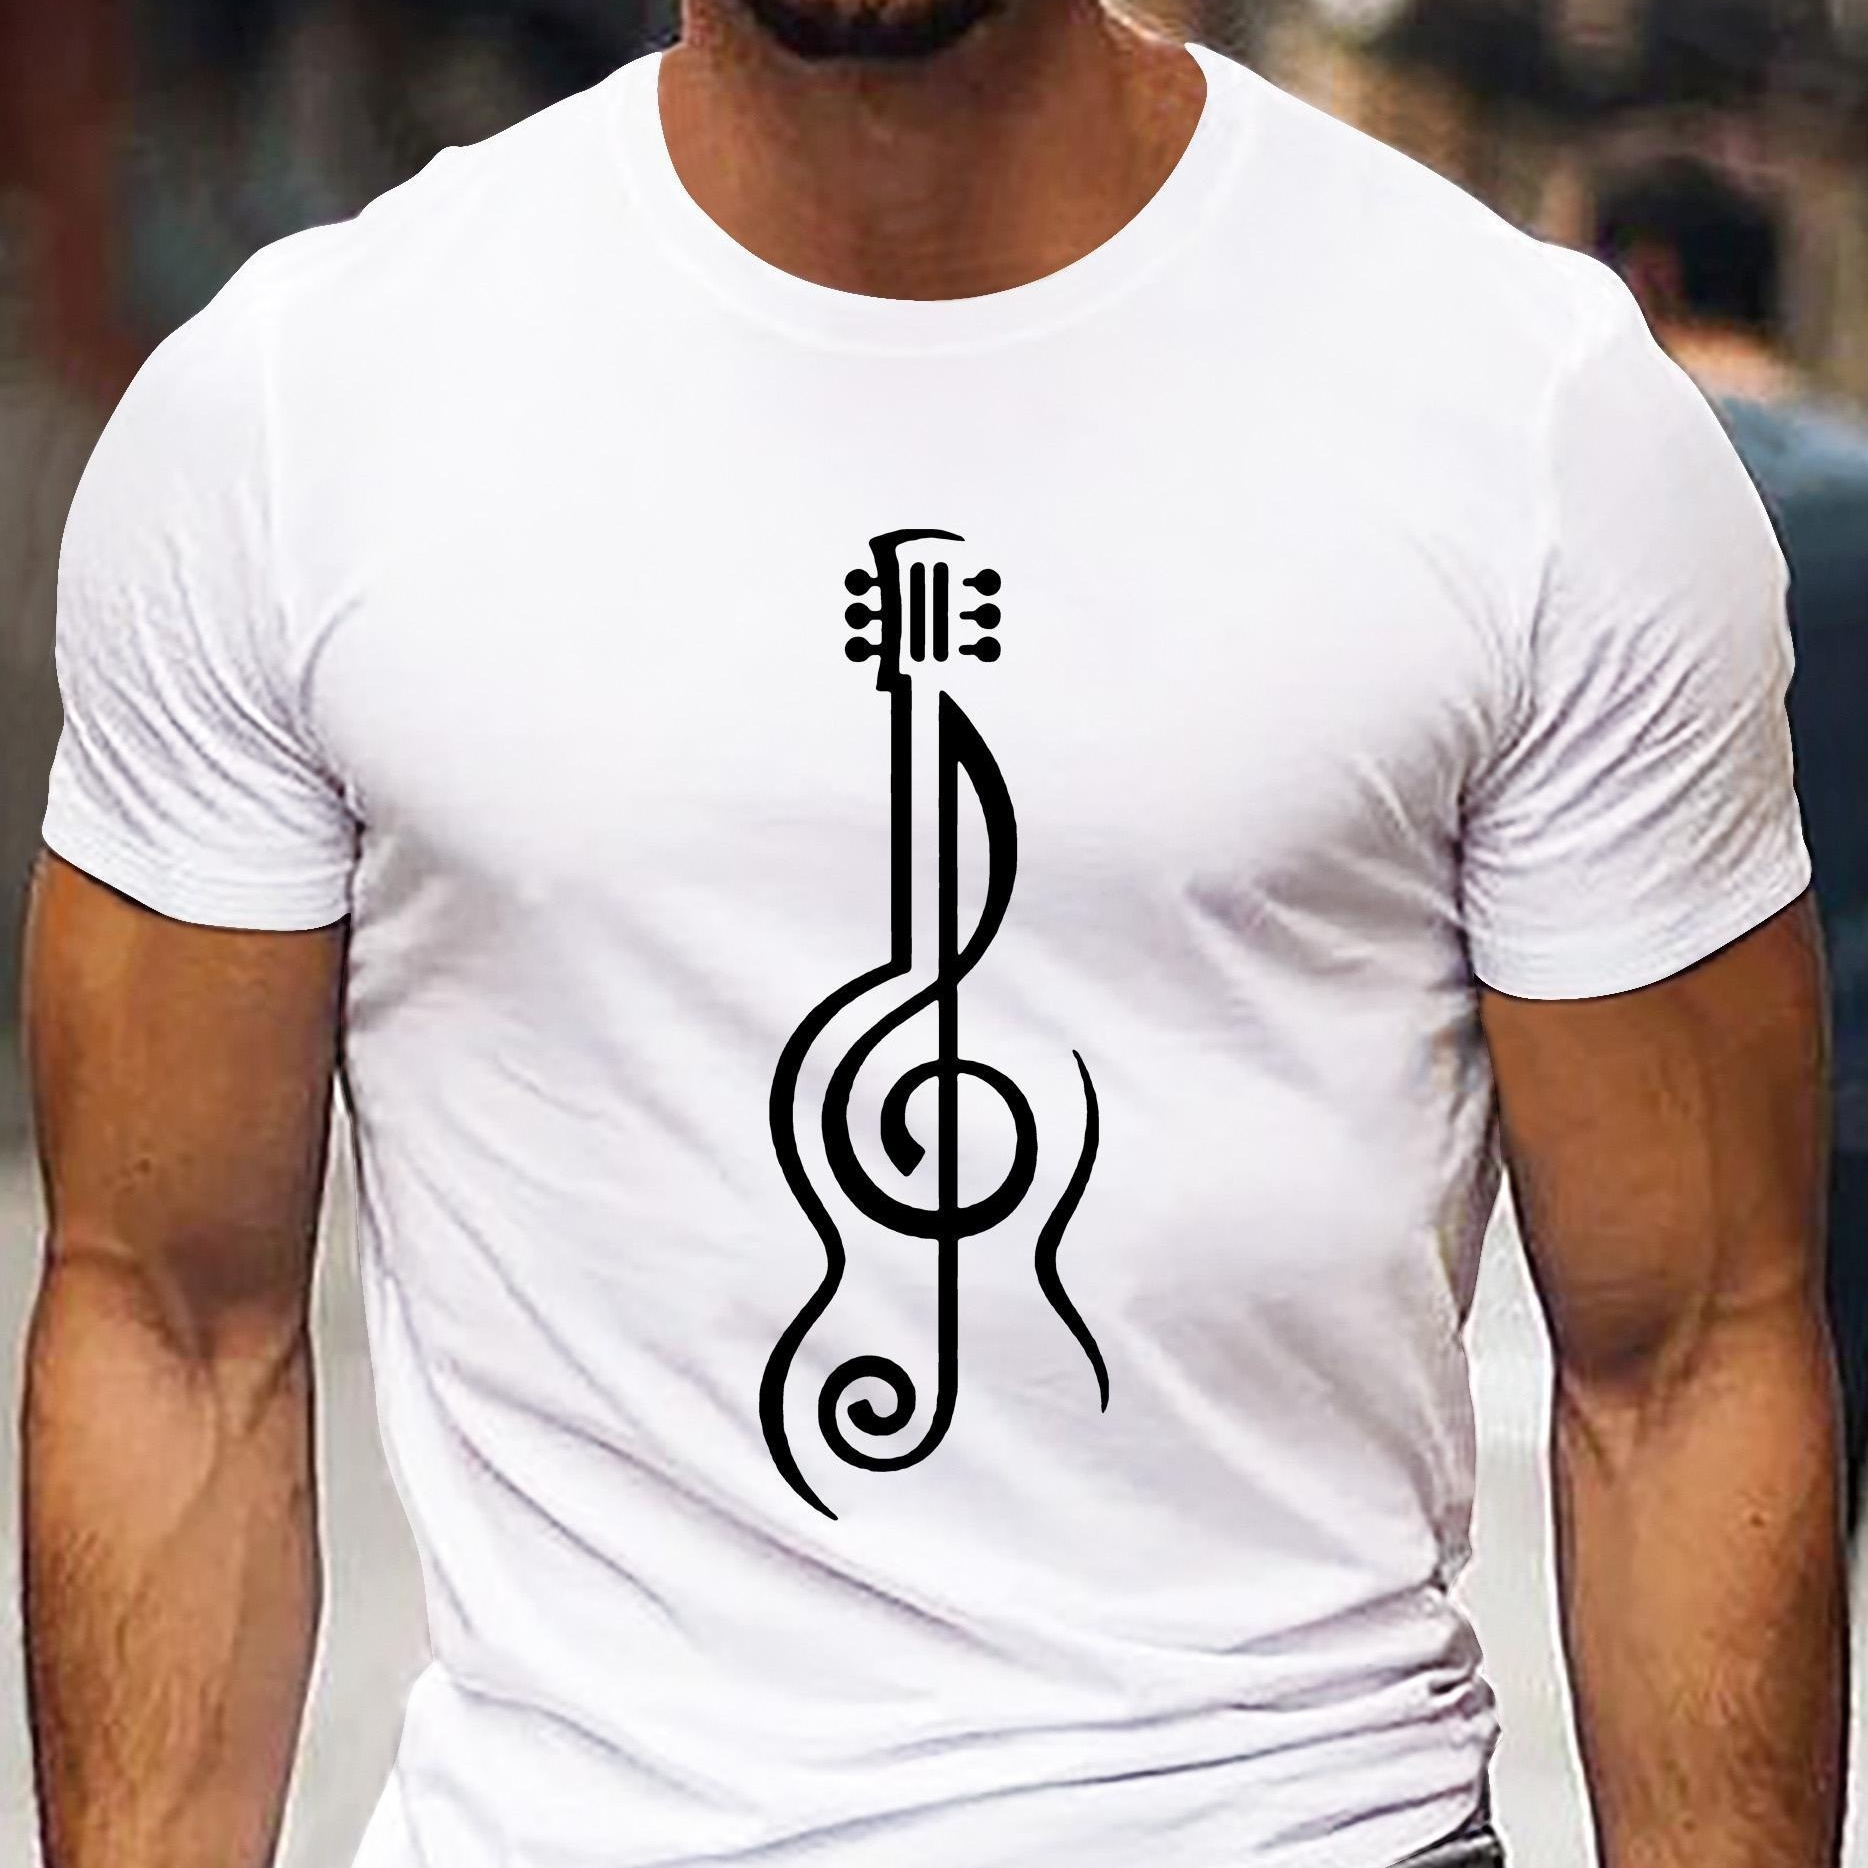 

Music Creative Print Summer Casual T-shirt Short Sleeve For Men, Sporty Leisure Style, Fashion Crew Neck Top For Daily Wear